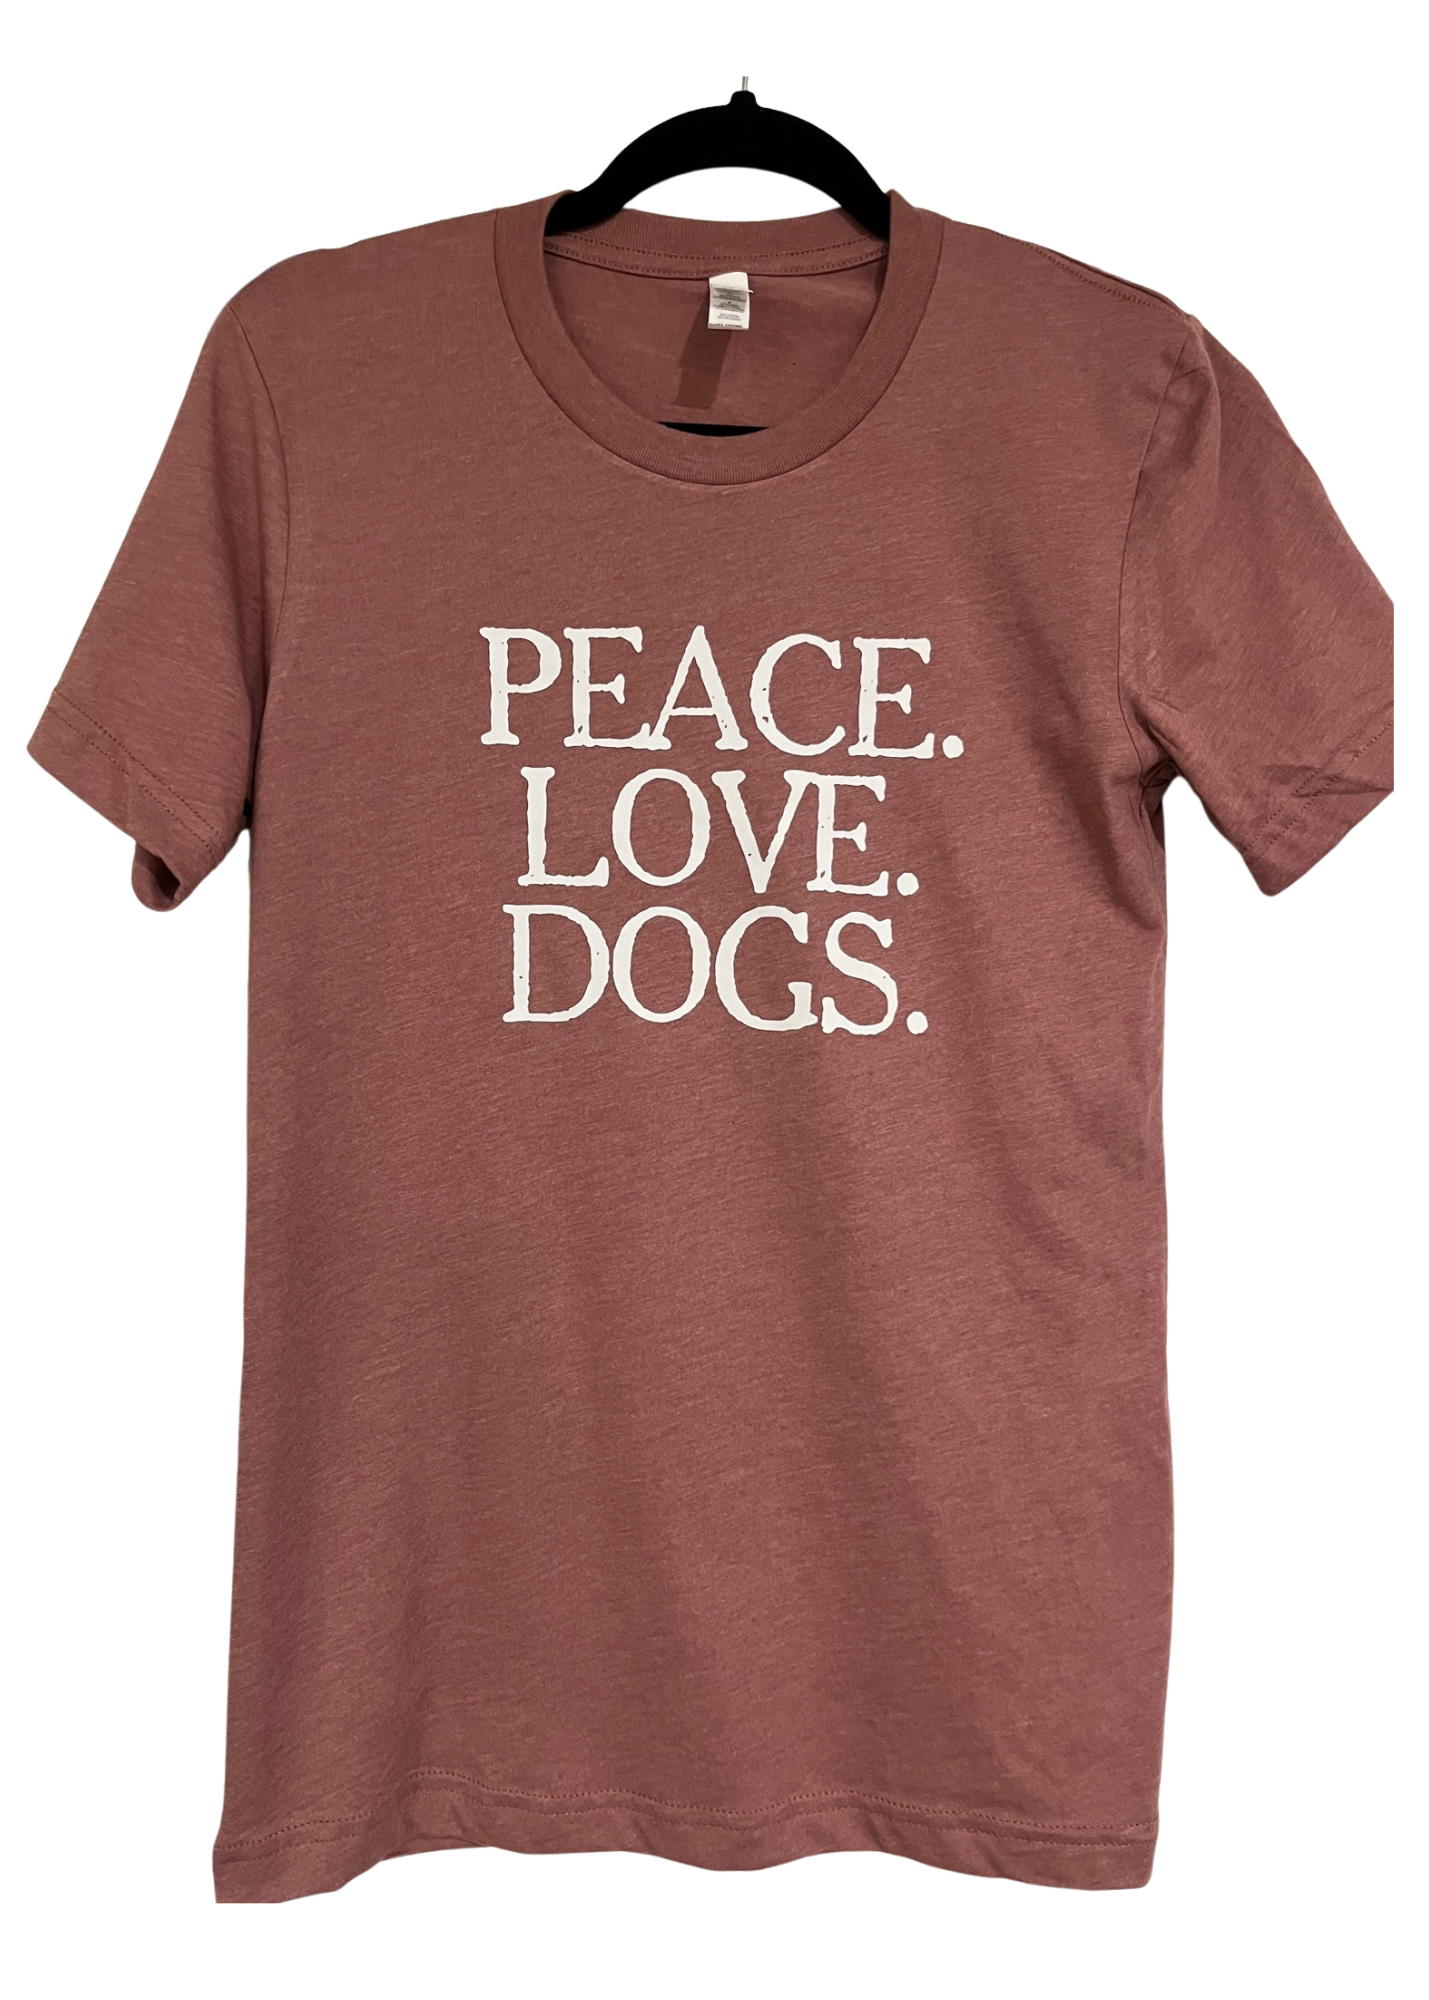 Mauve tshirt with text, "Peace. Love. Dogs" 